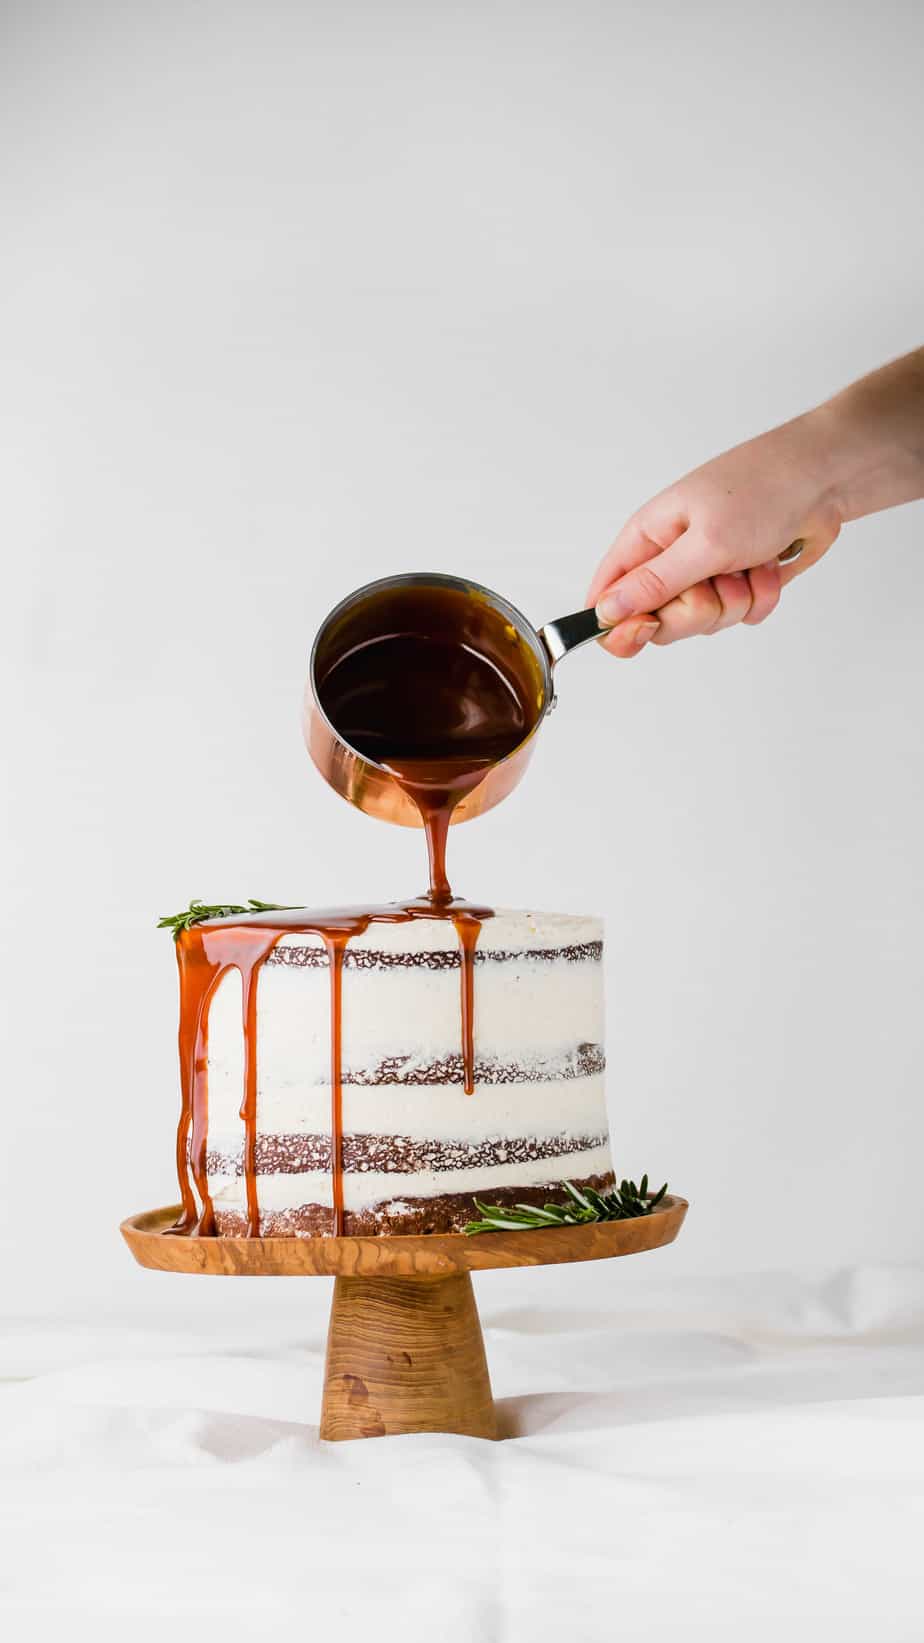 A ginger sponge cake frosted with buttercream and topped with a drizzle of caramel sauce.
